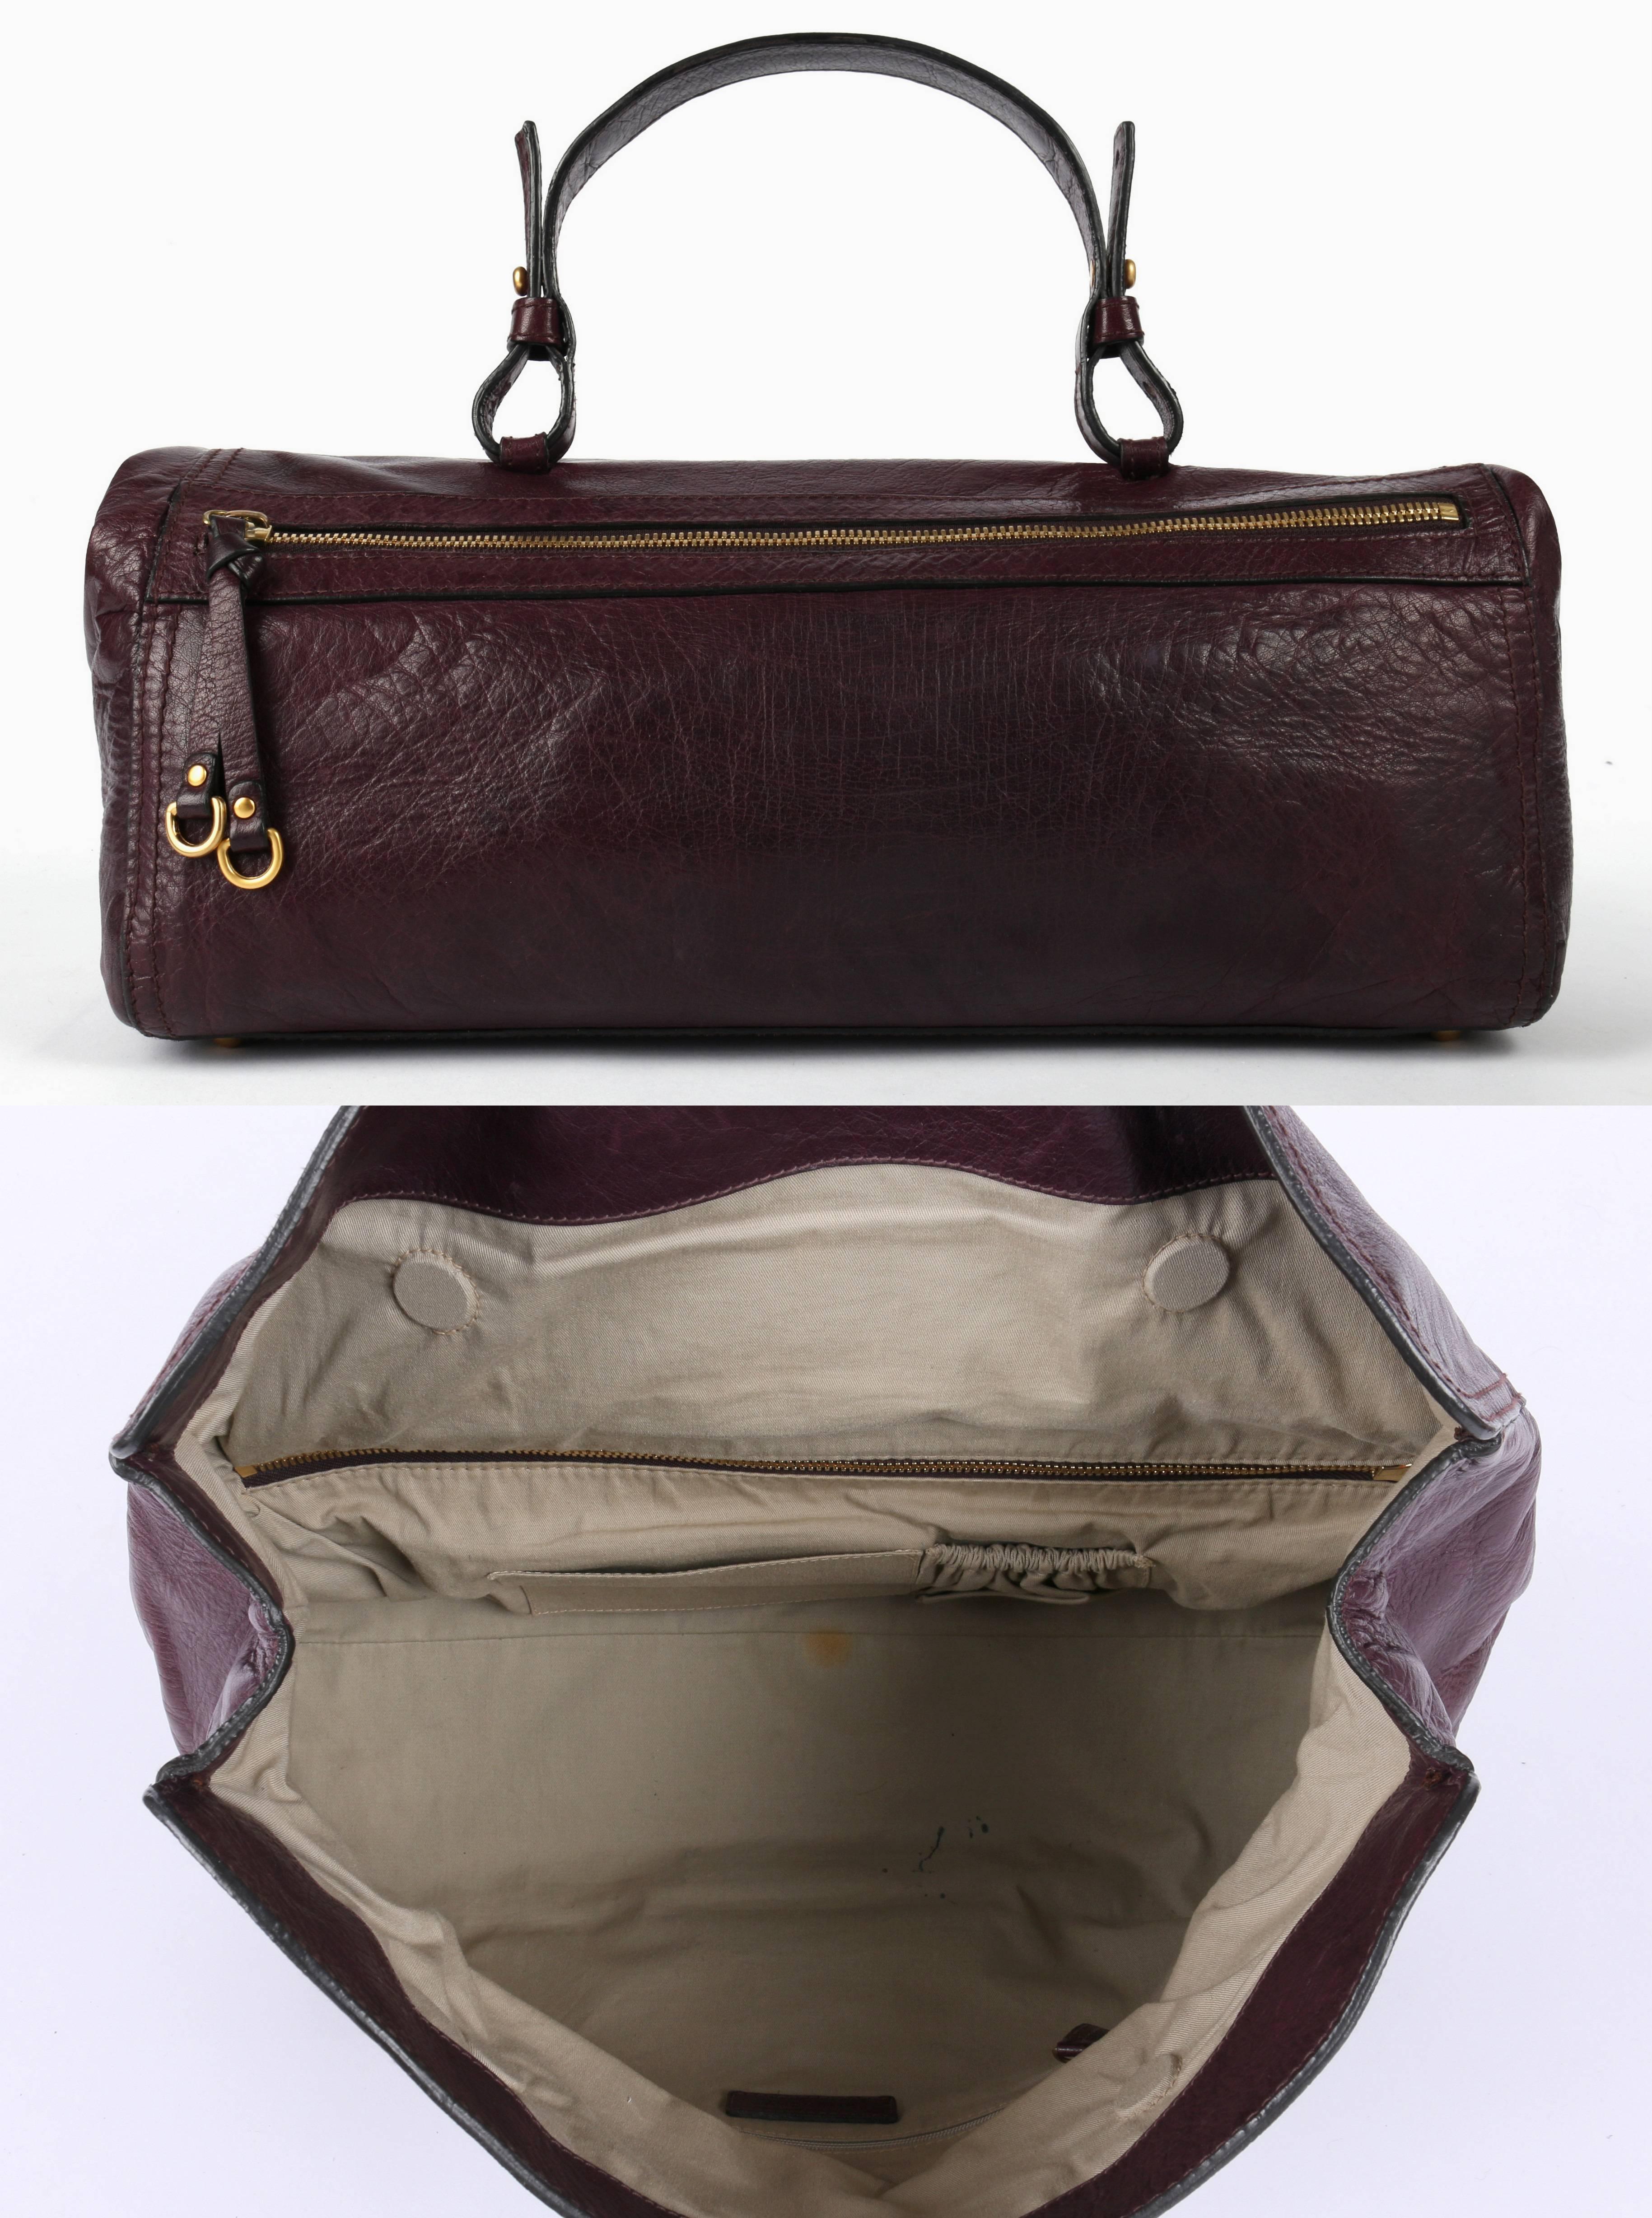 Givenchy c.2007 plum purple genuine leather east-west buckle bag. Adjustable flat leather top handle. Fold-over design with central gold-tone buckle closure. Dual hidden interior magnetic closures. Exterior back zip pocket. Protective gold-tone base